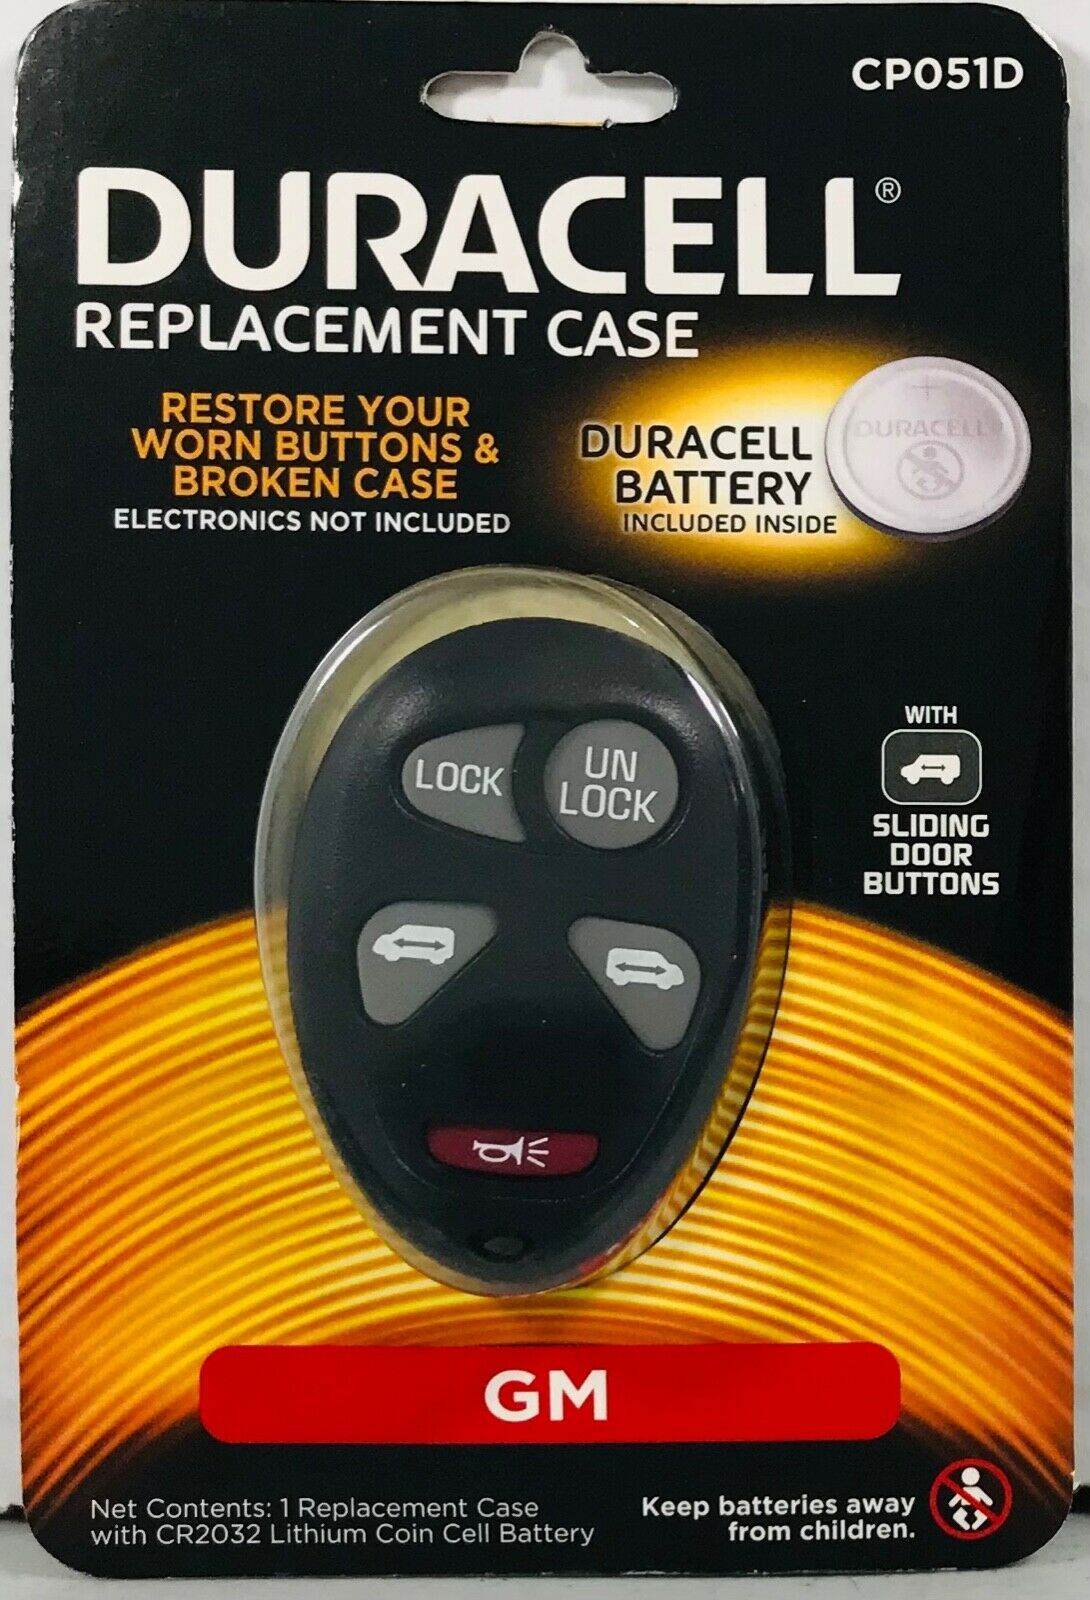 Primary image for GM Duracell Replacement Case CP051D Restore Your Worn Buttons & Broken Case